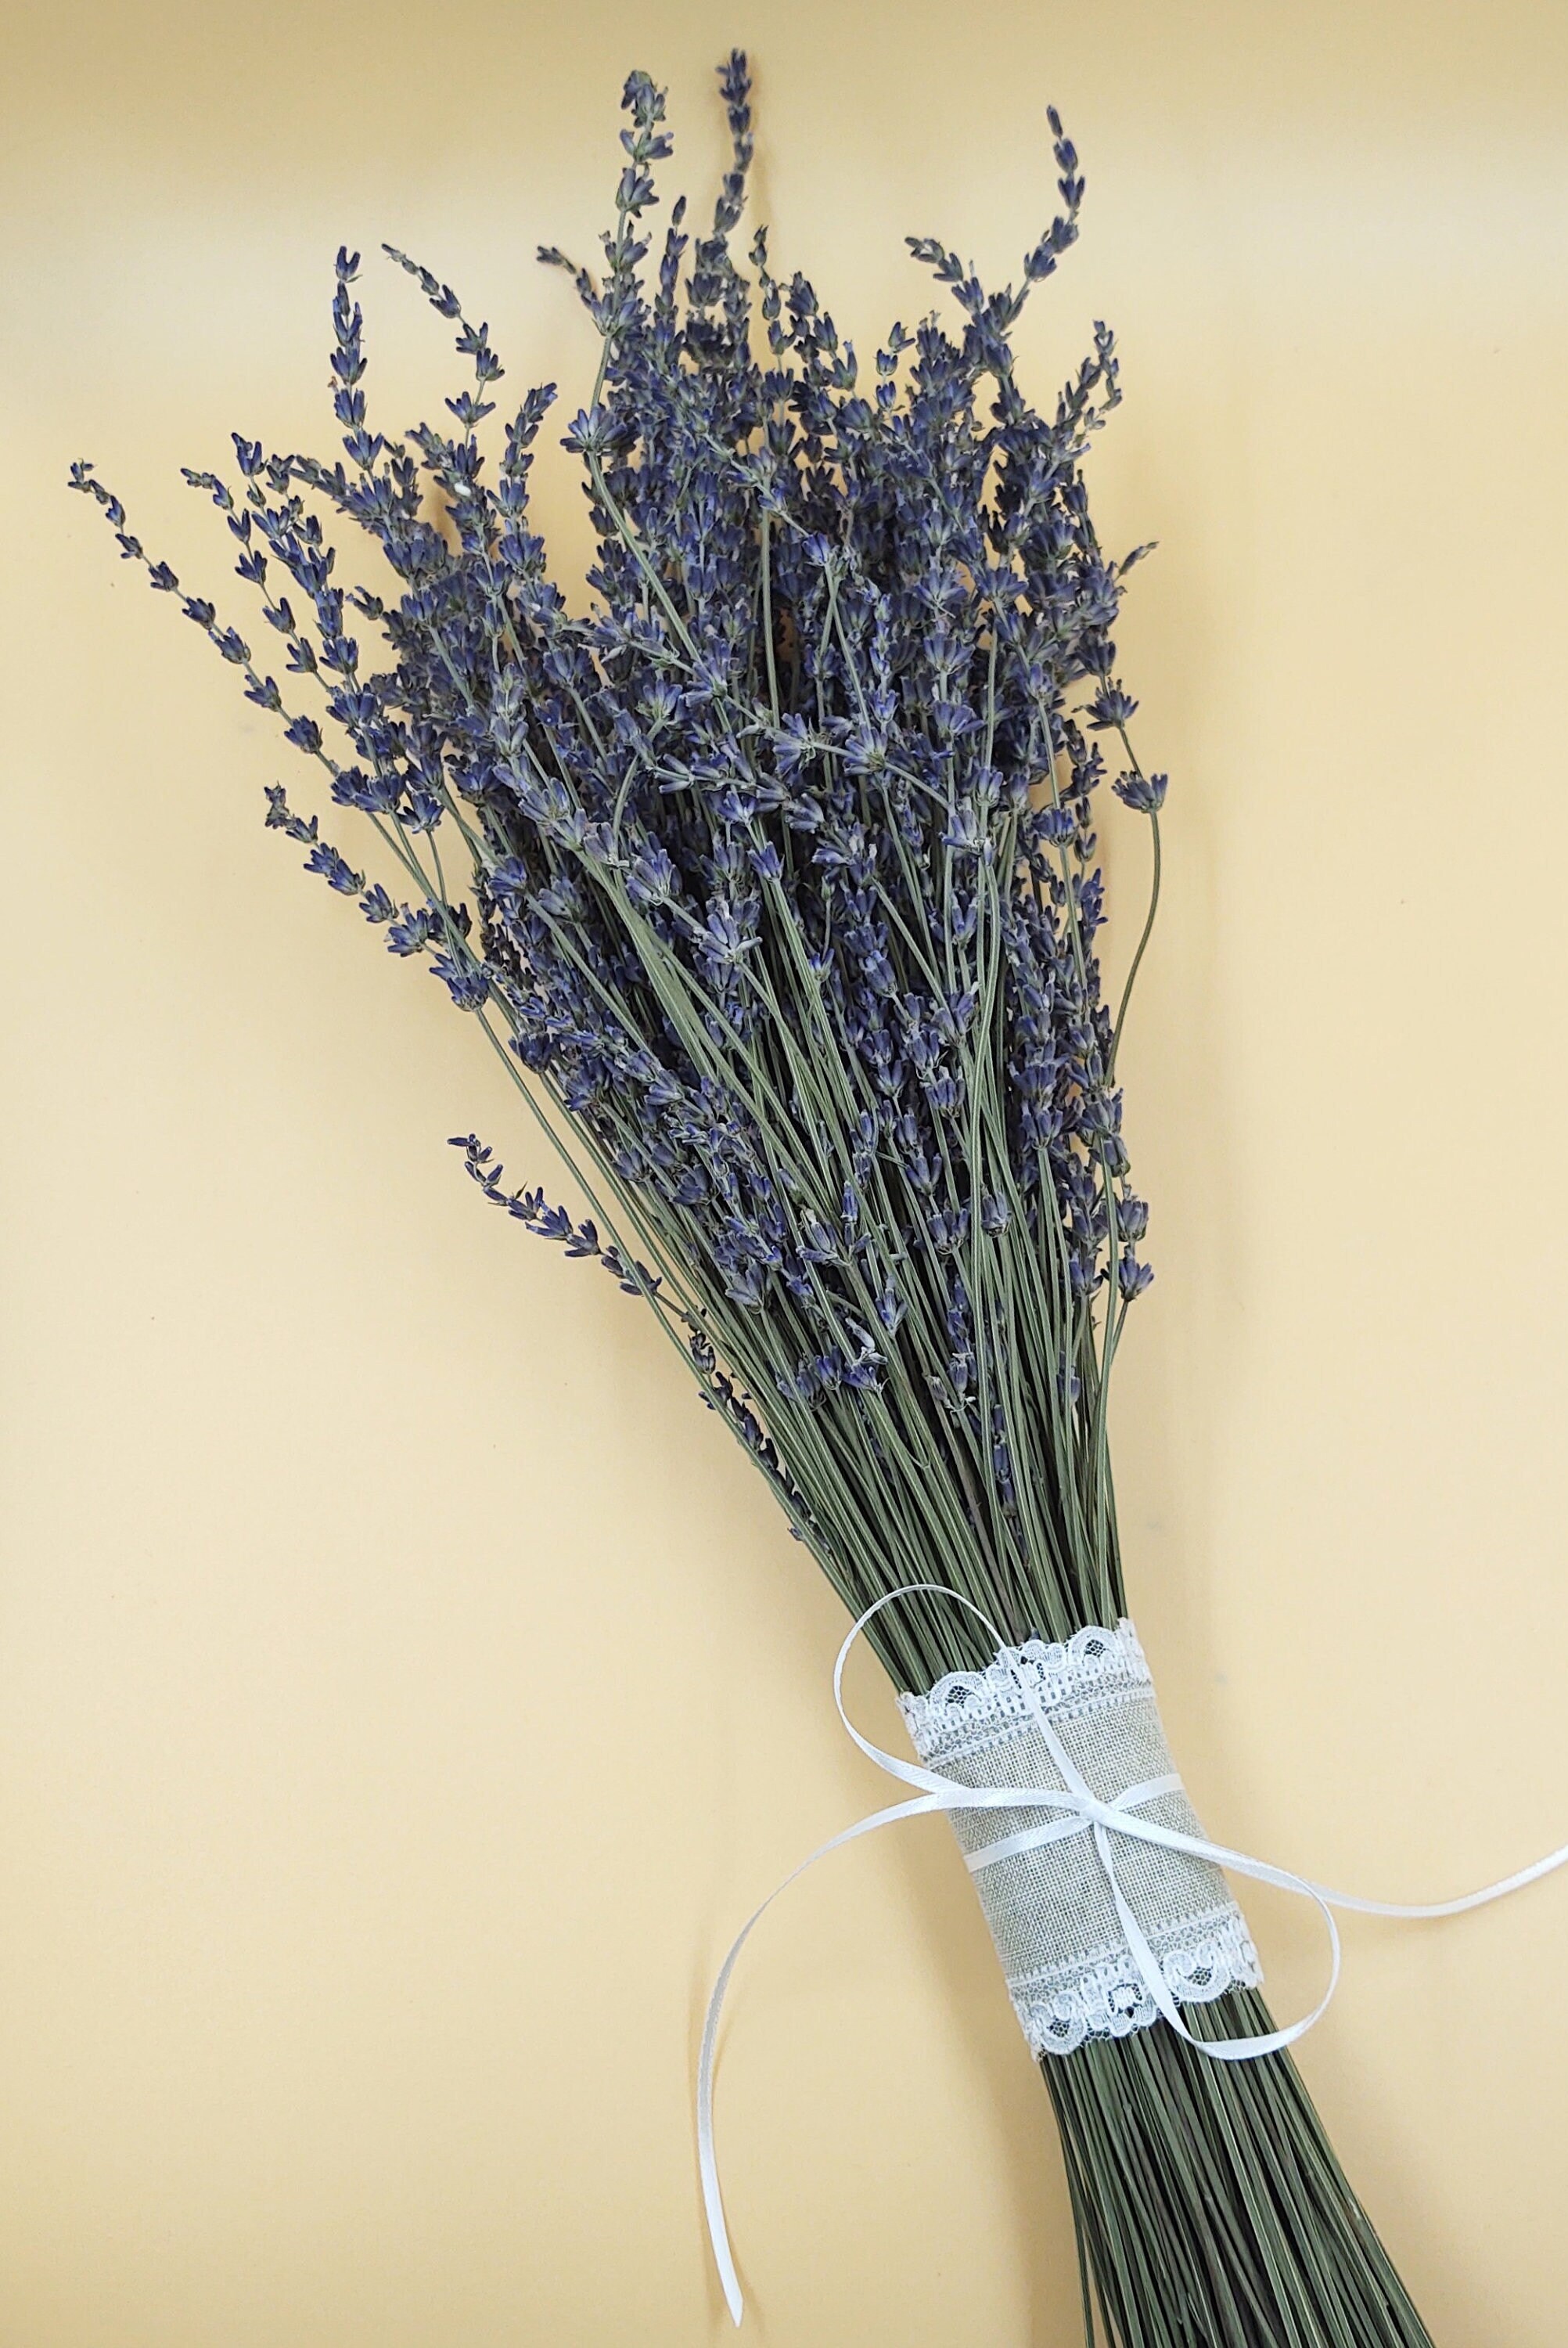 Dried Lavender Bundle/bunch/bouquet 2023 Harvest Tall French